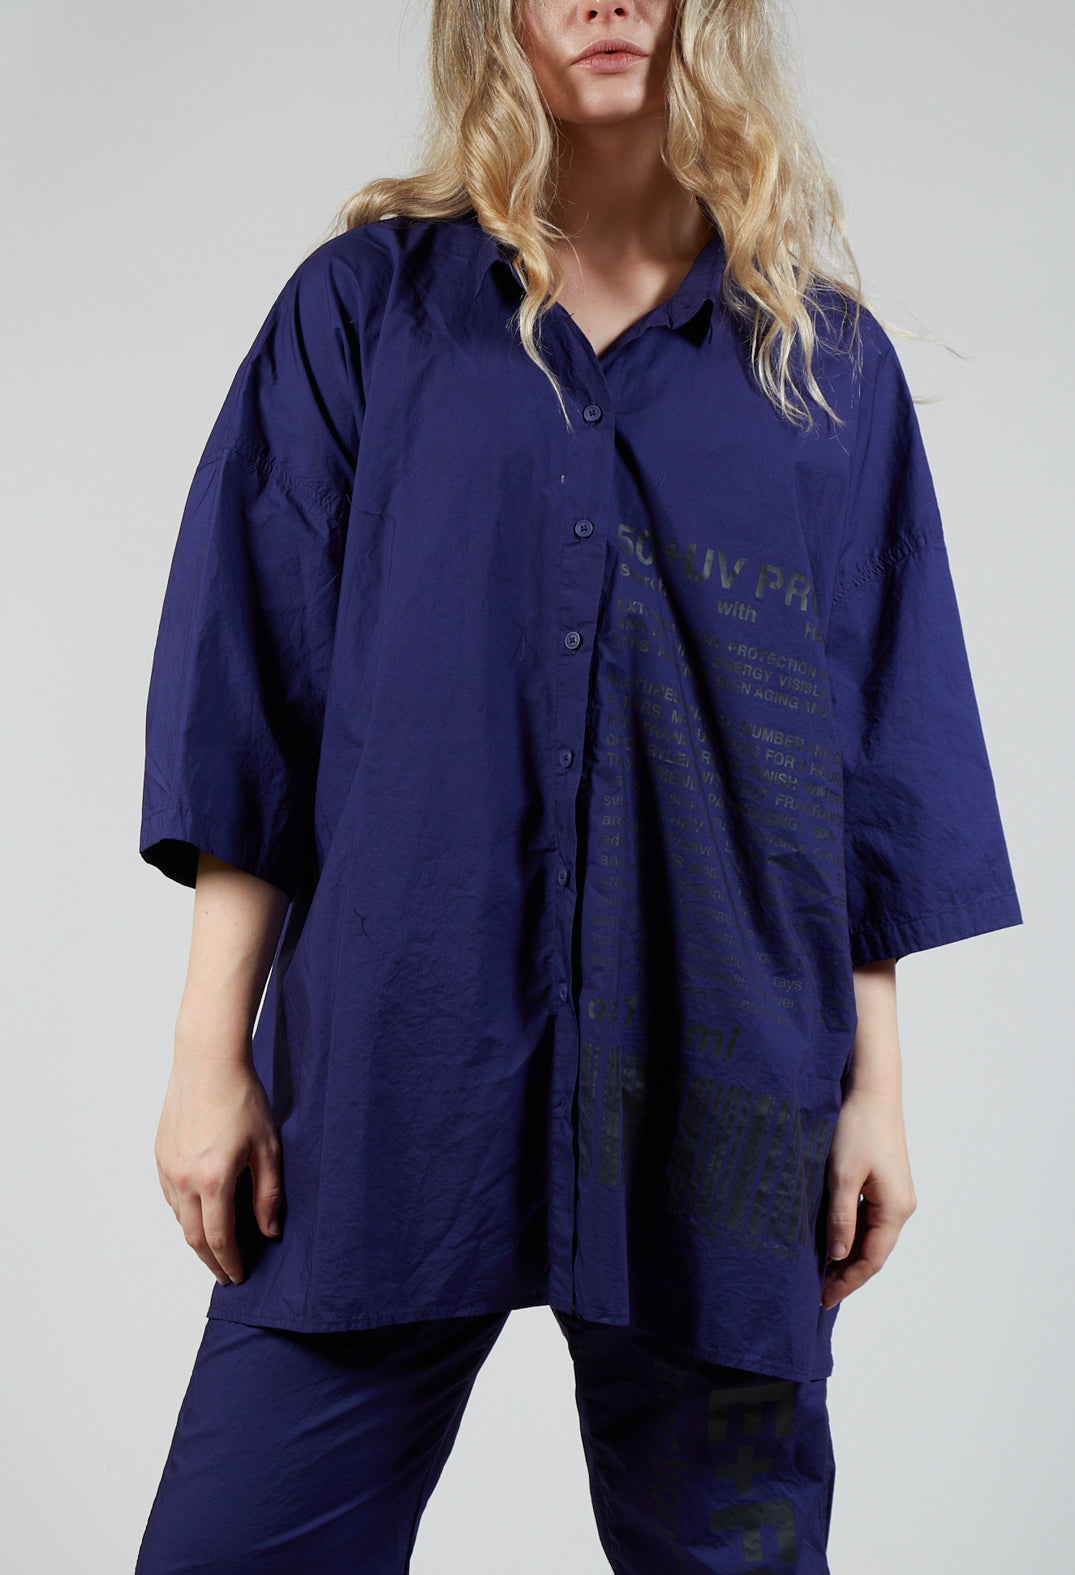 Relaxed Fit Shirt with Lettering Motif in Azur Print